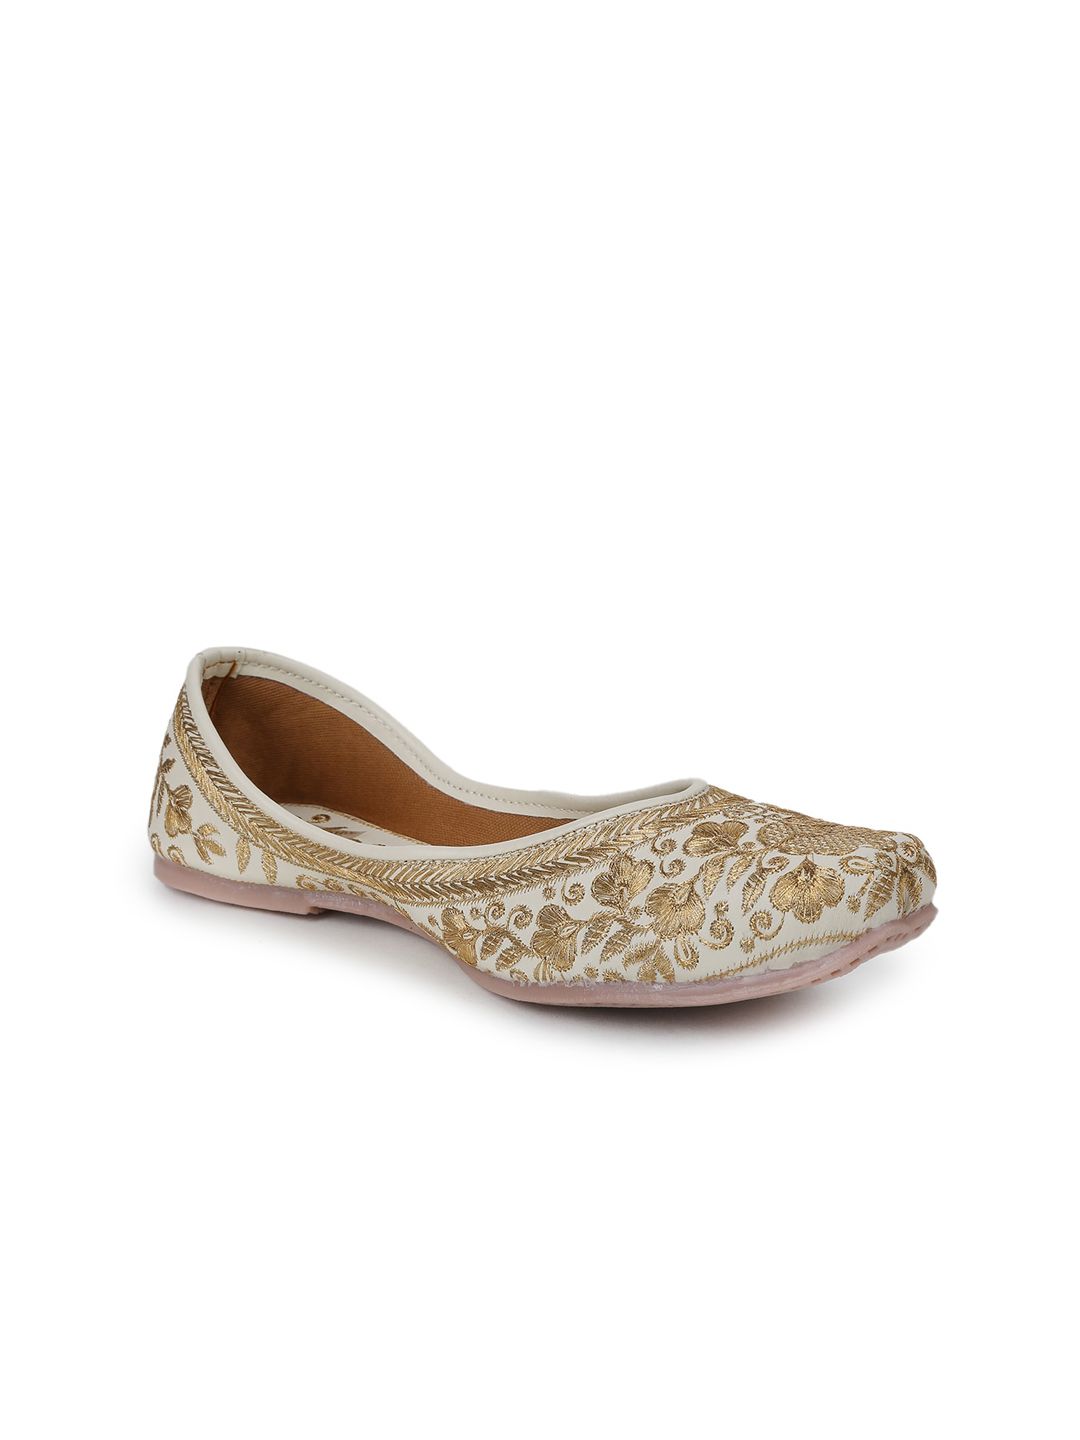 The Desi Dulhan Women Gold-Toned Ballerinas Flats Price in India